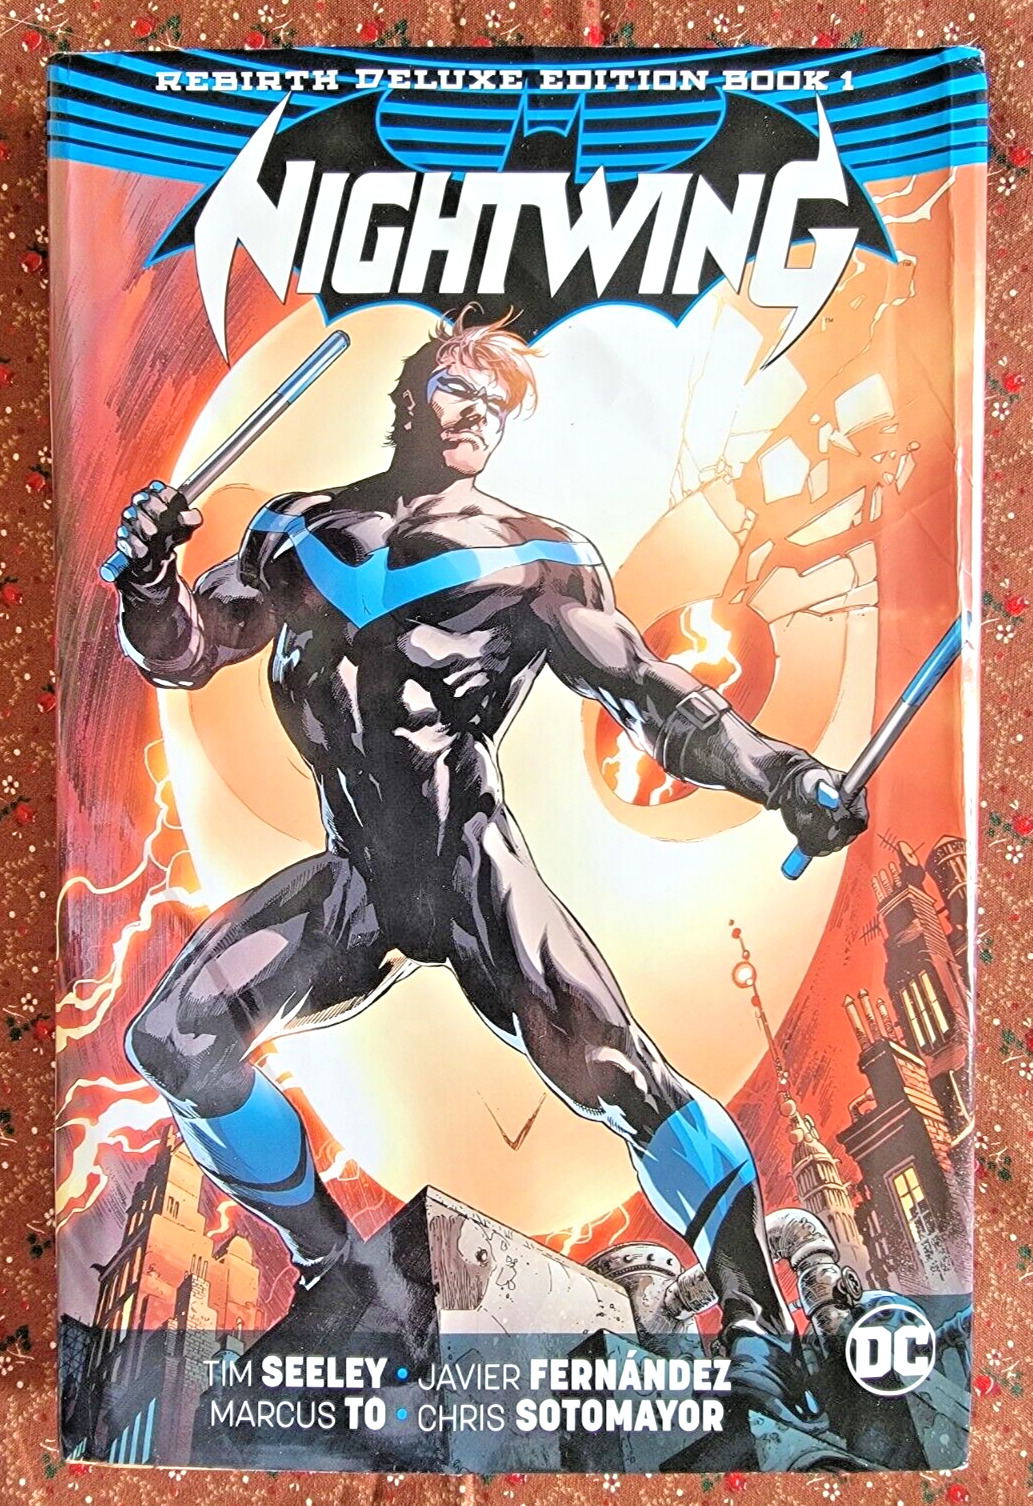 Nightwing The Rebirth Deluxe Edition Volume 1 Hardcover DC Comics 2017